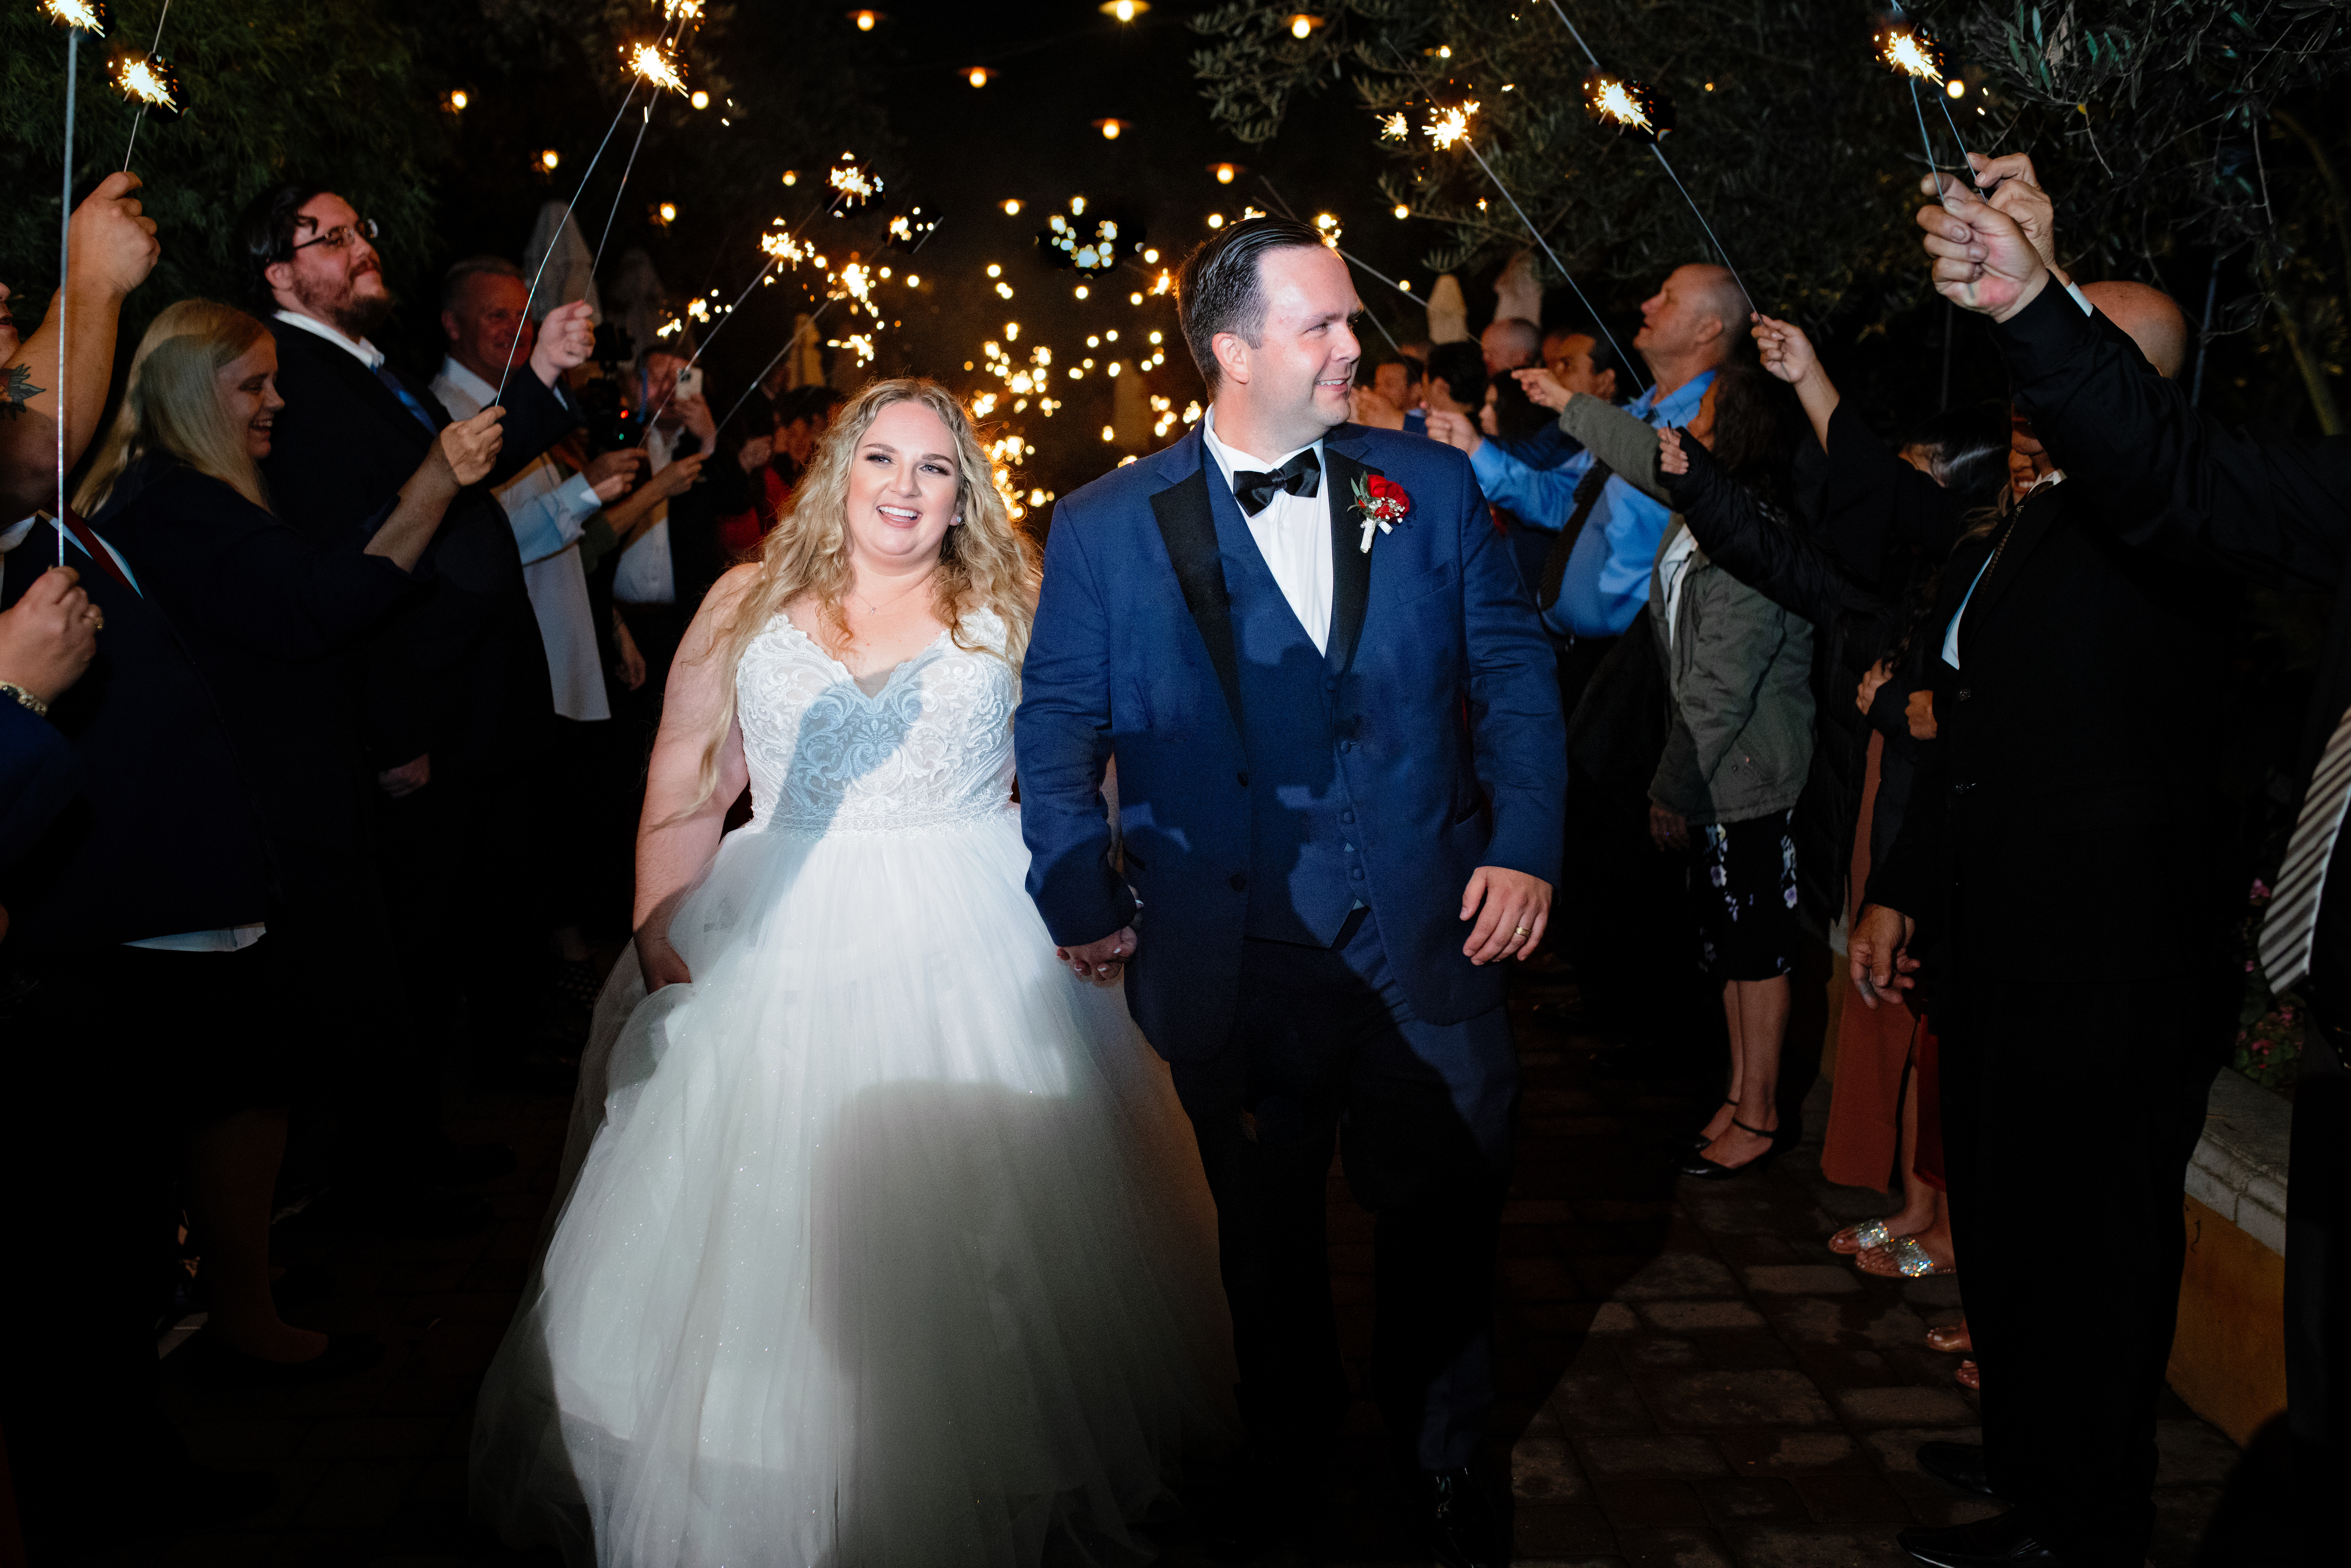 Newlyweds walking happily out of their Viaggio Winery wedding while guests hold up lit sparklers